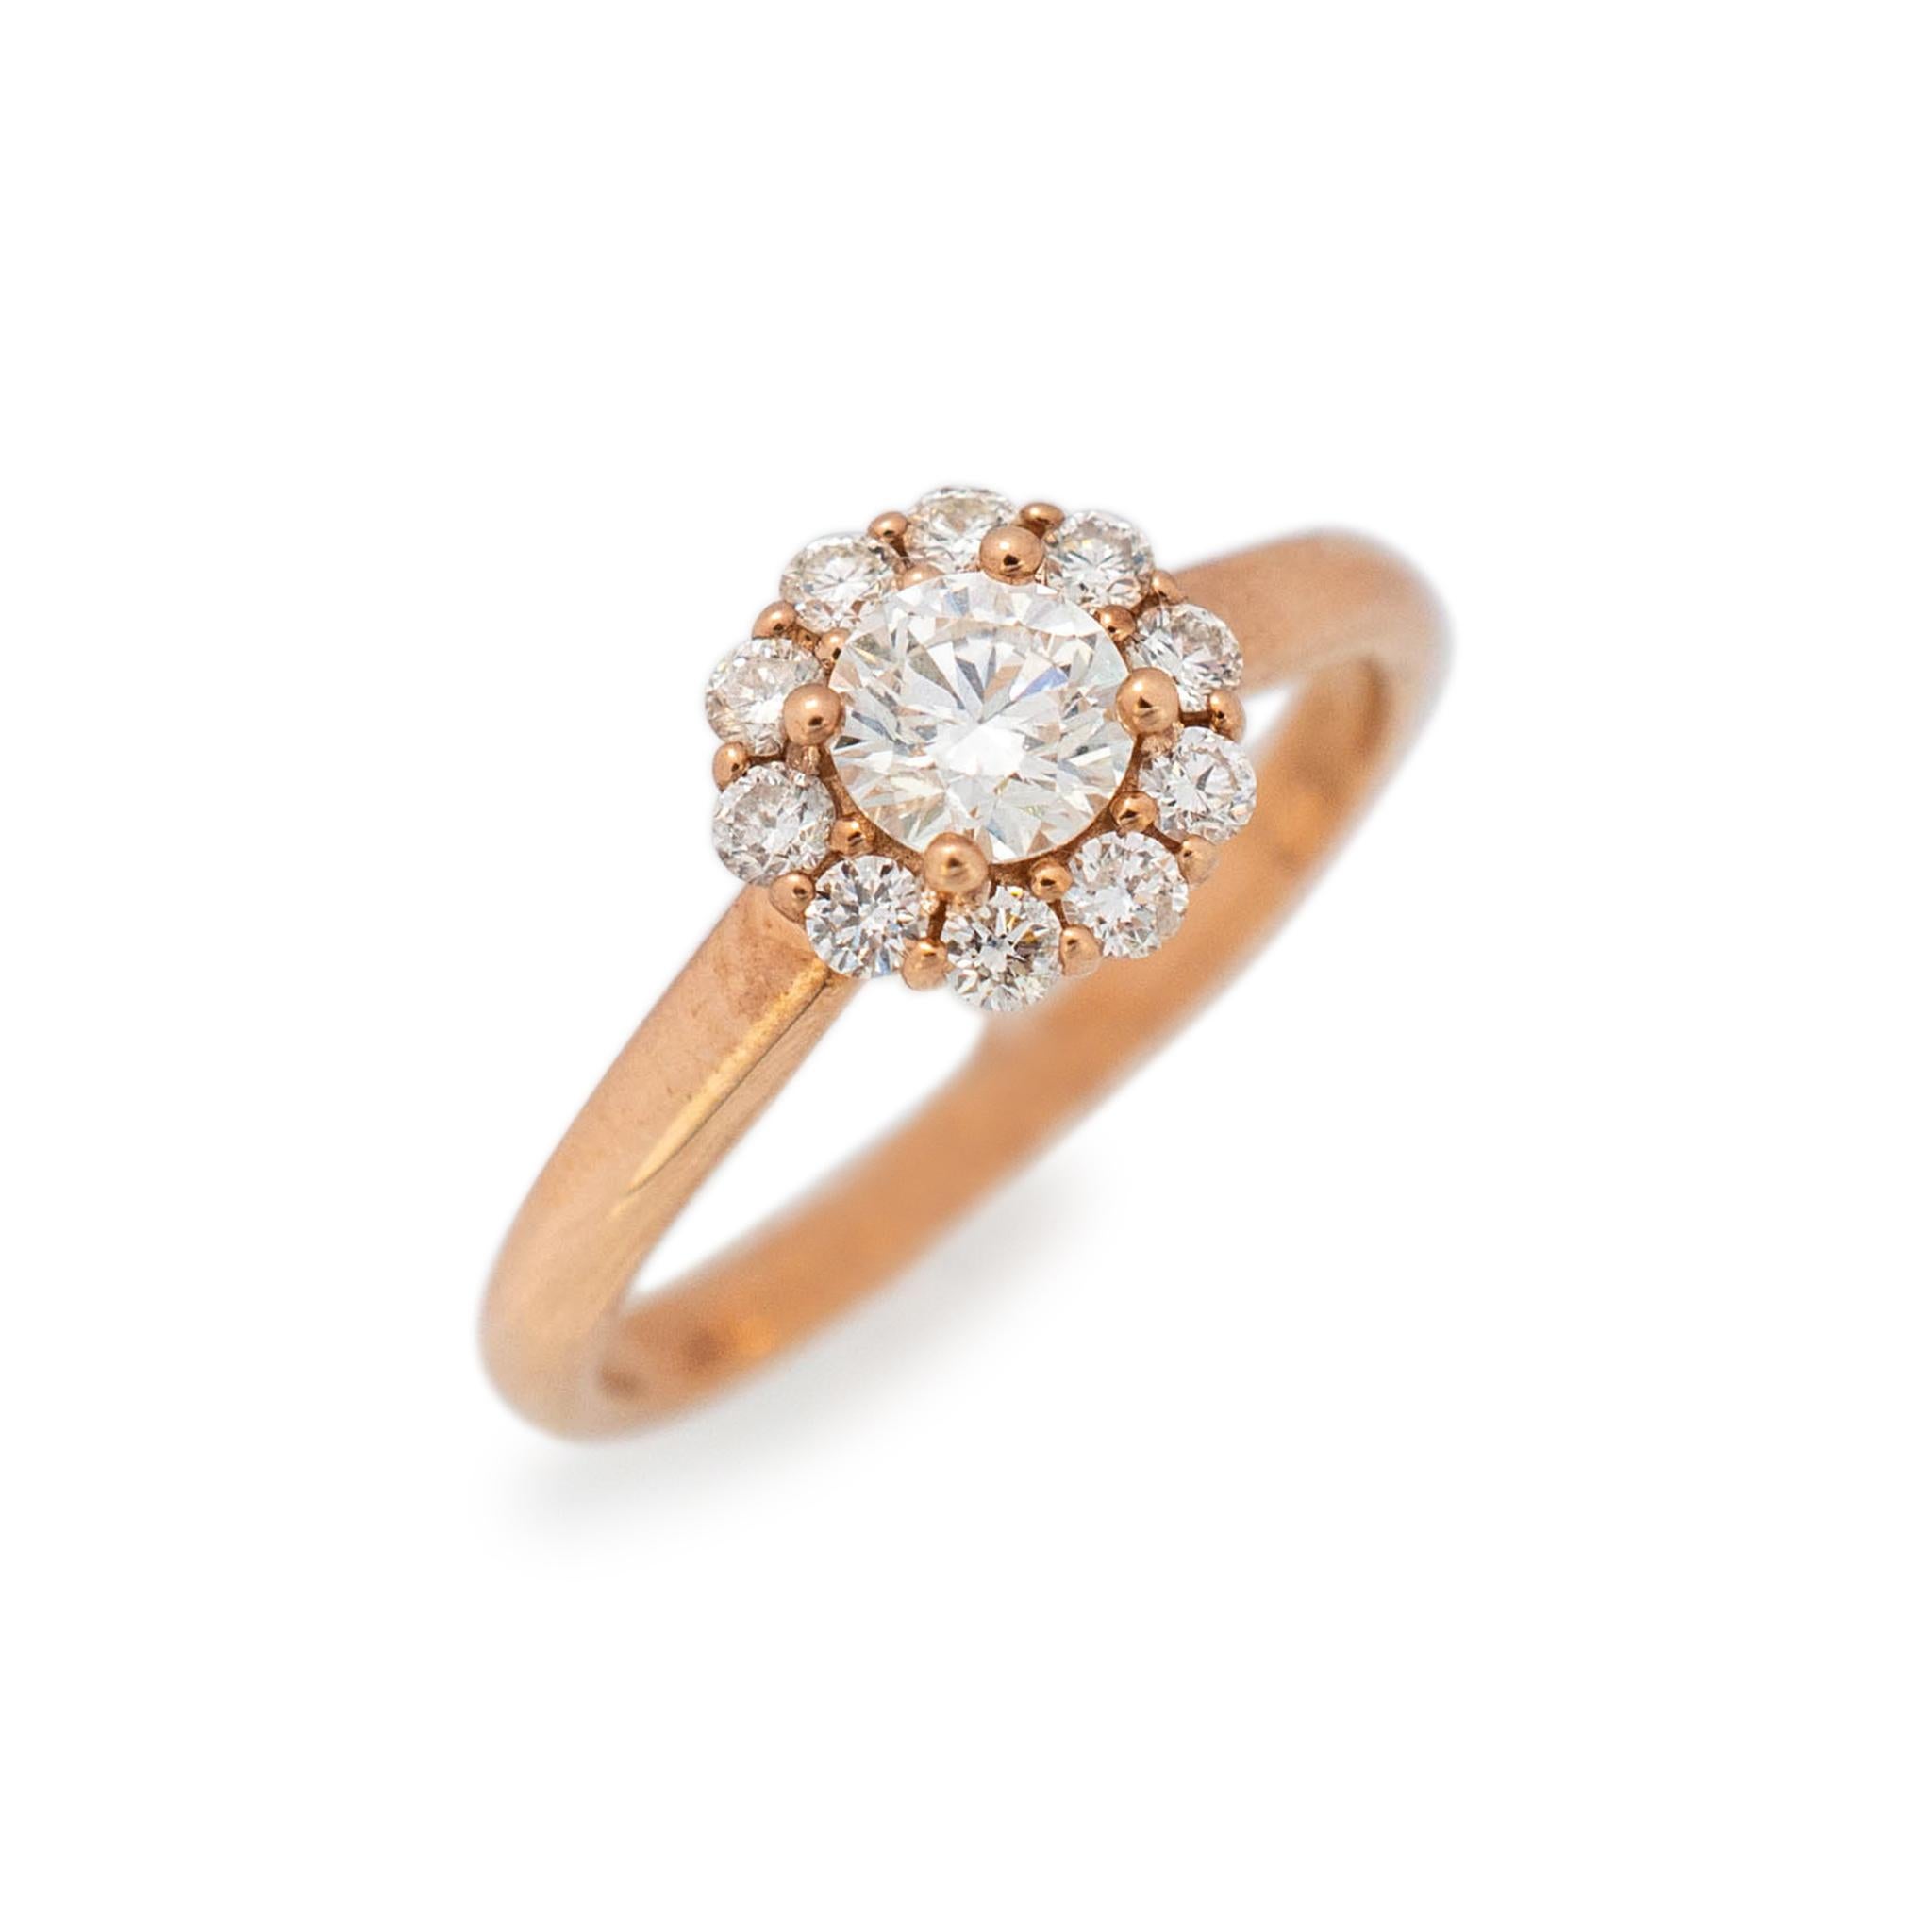 Gender: Ladies

Material: 14K Rose Gold

Size: 6

Shank Width: 2.30mm

Weight: 2.60grams

Ladies 14K rose gold, diamond halo engagement ring with a half round shank. Engraved with 